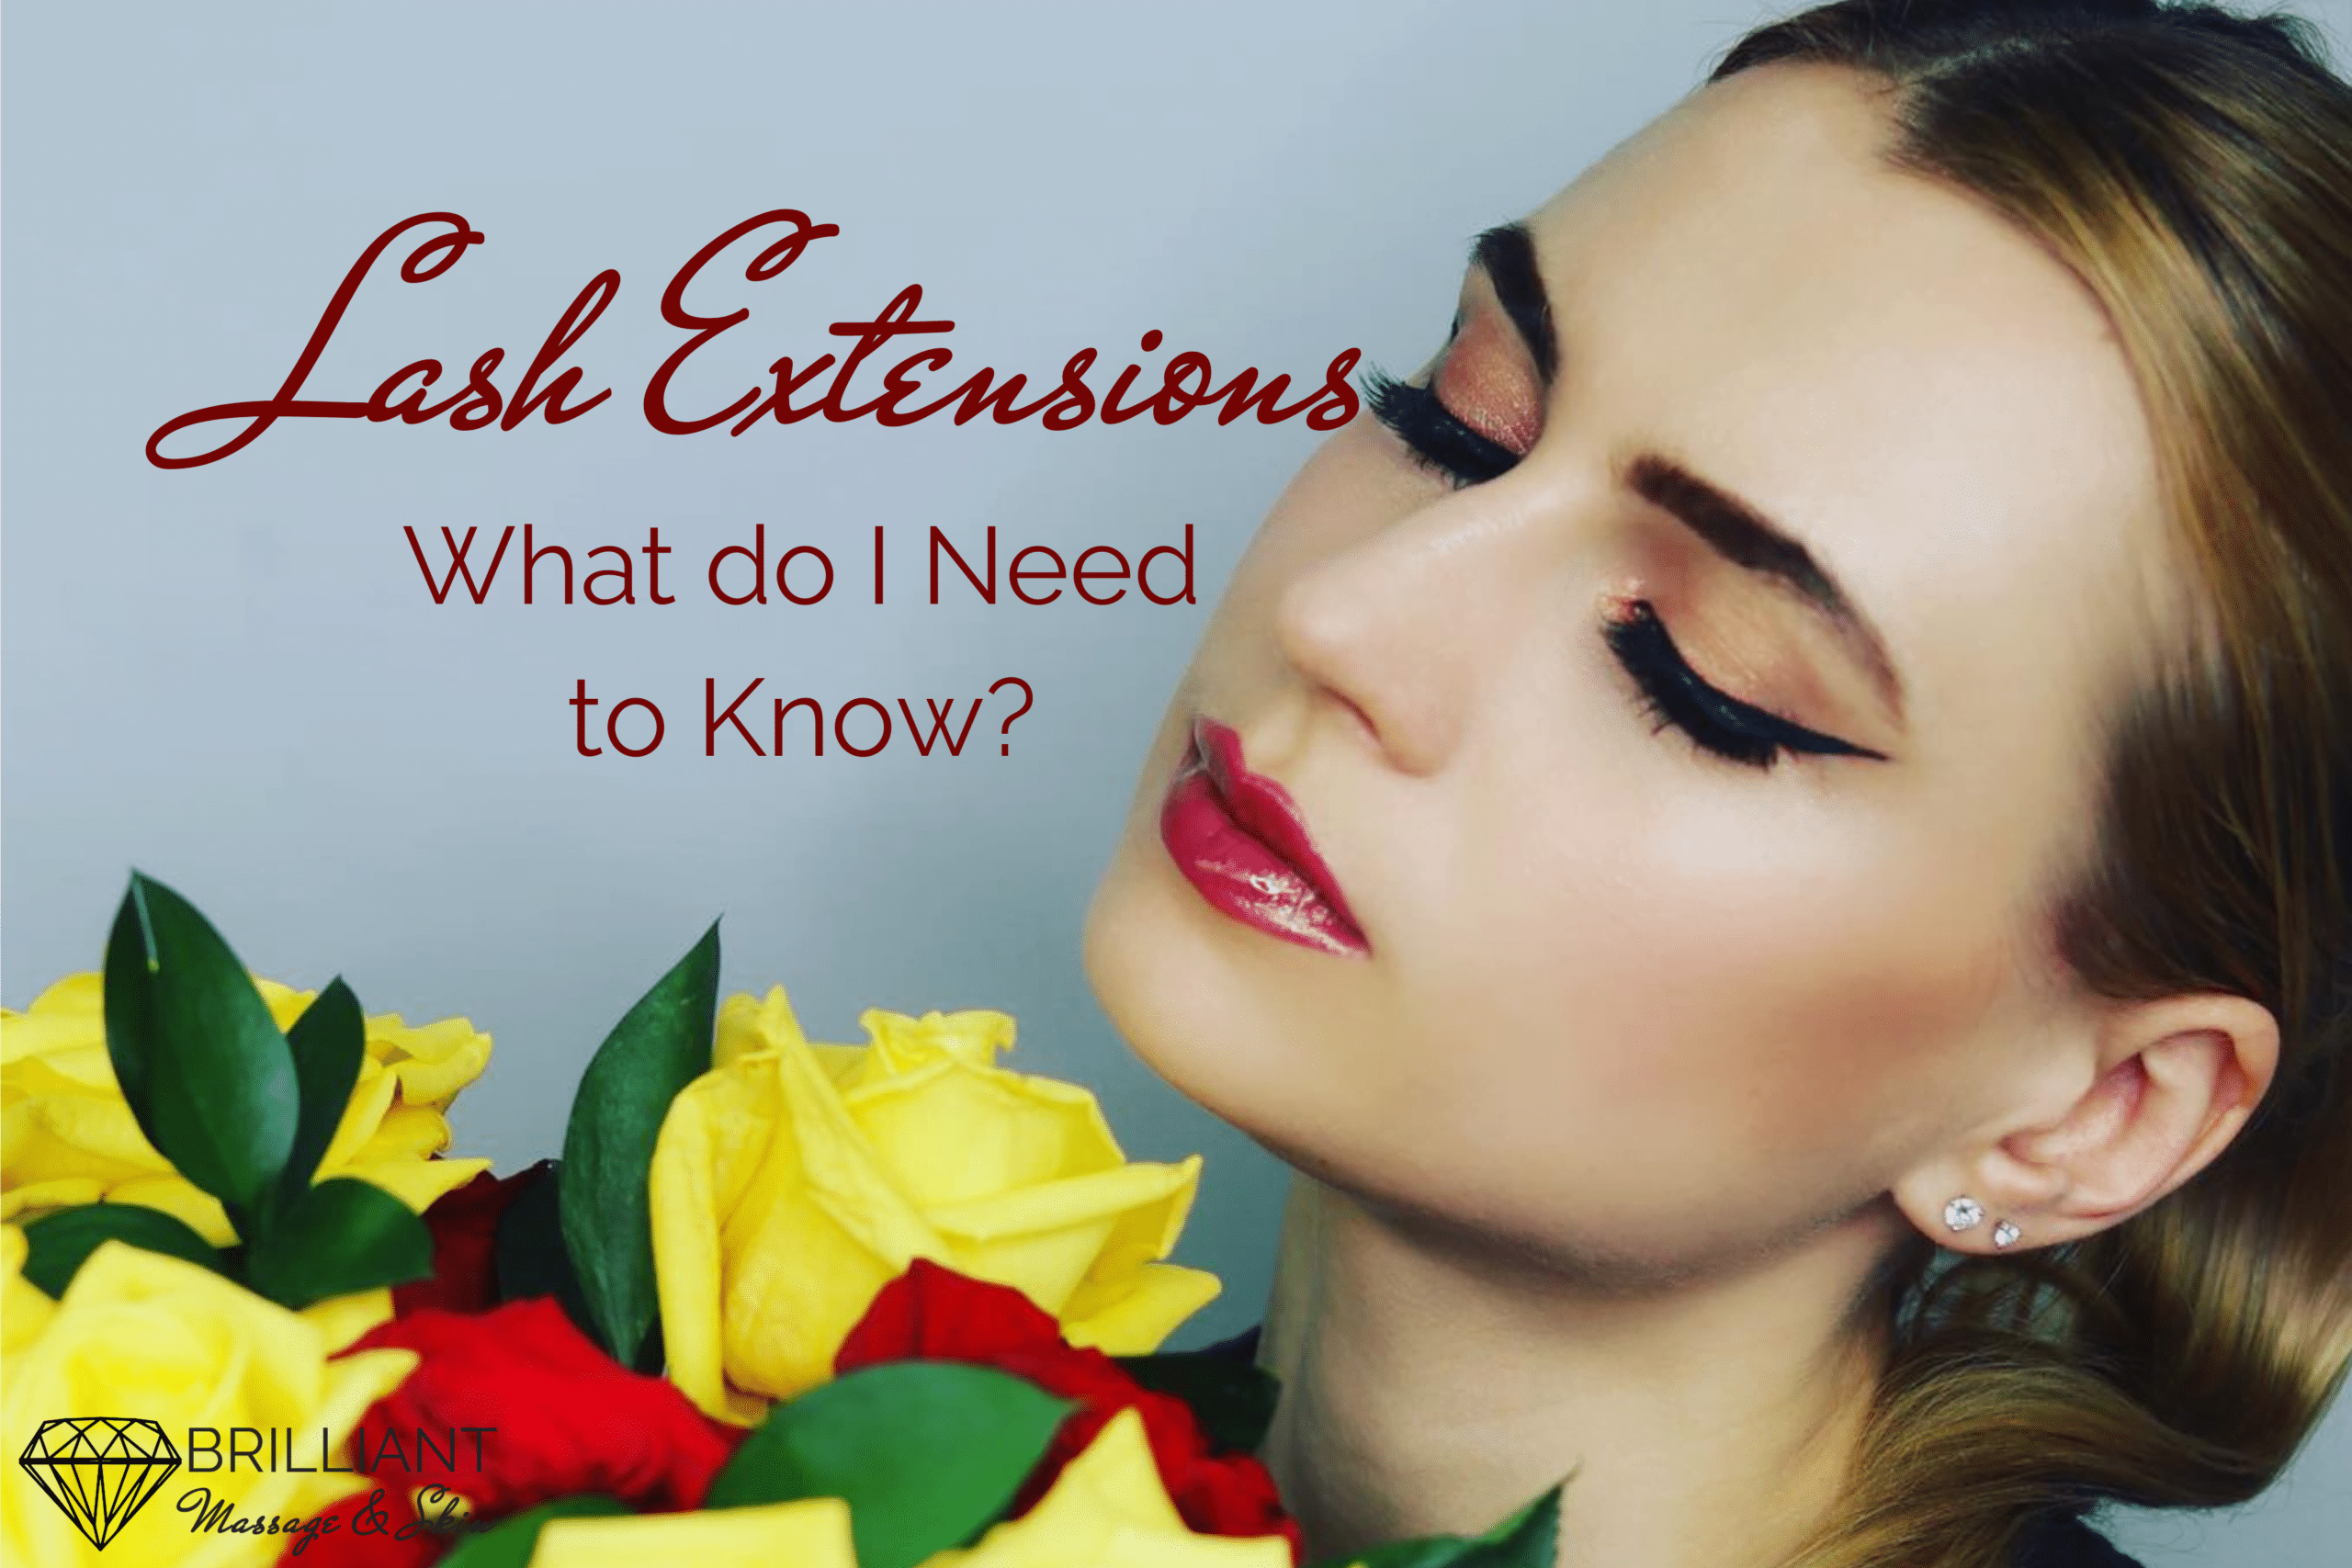 Lash Extensions – What Do I Need To Know Brilliant Massage